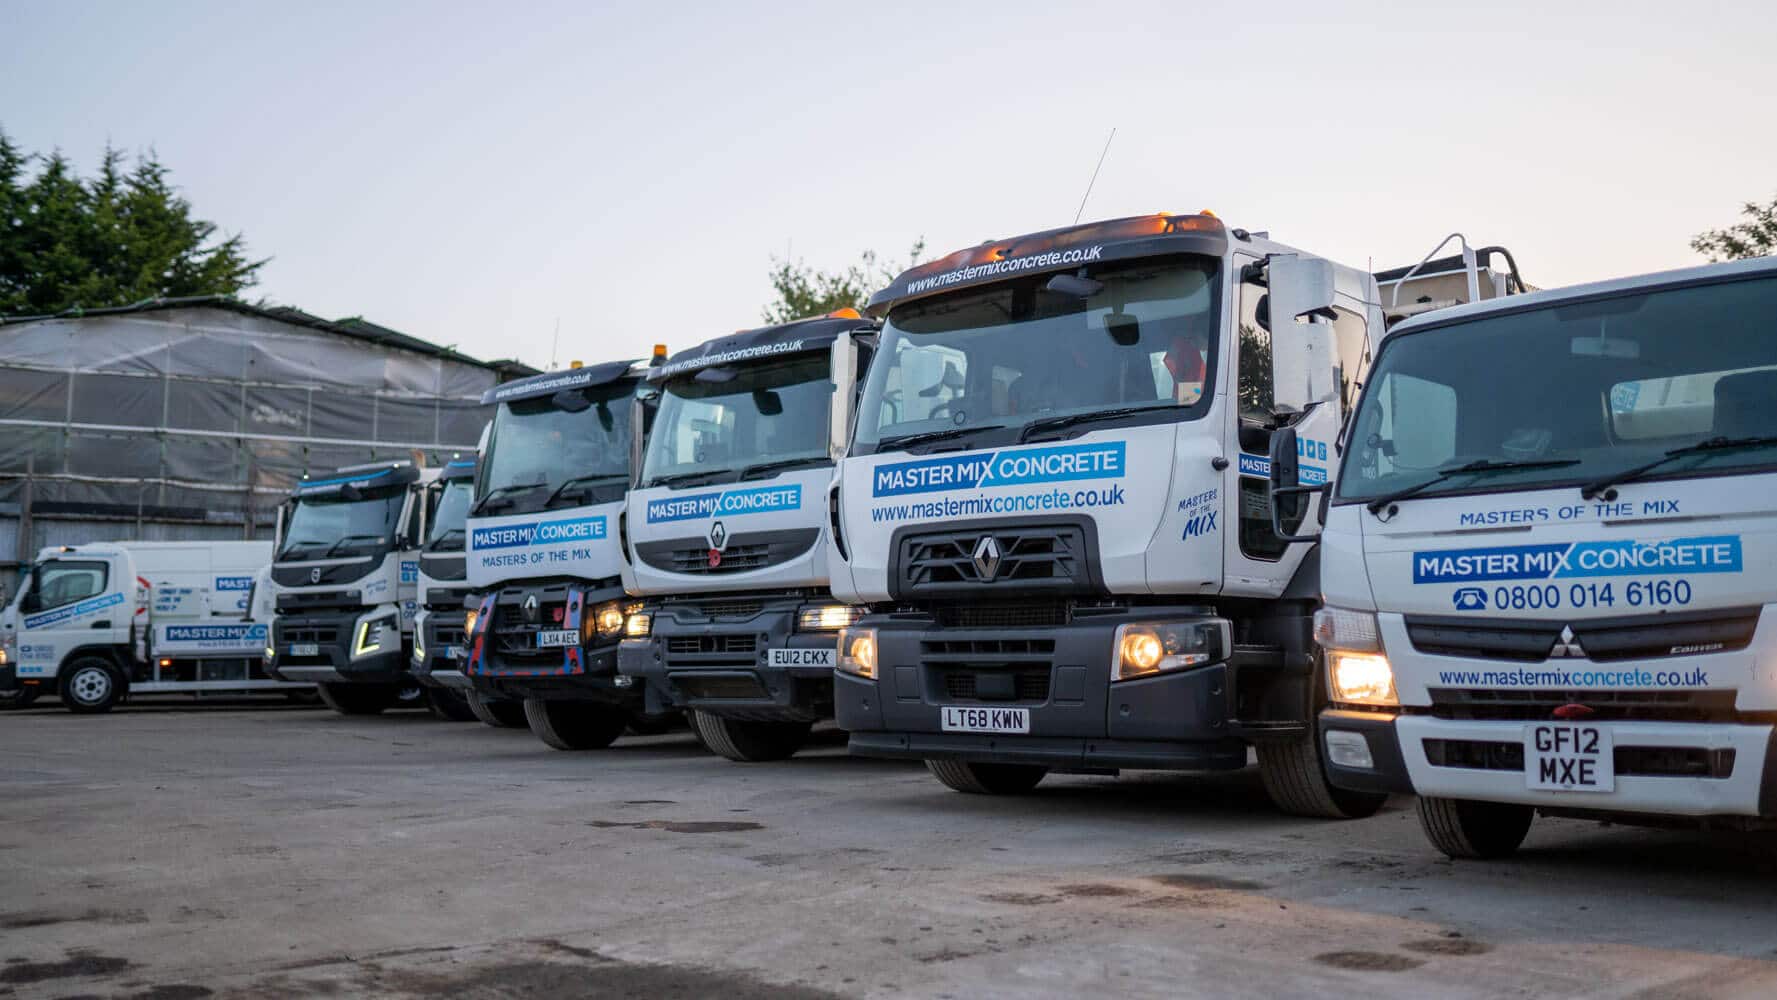 The Master Mix Concrete fleet of mixers lined up in Watford